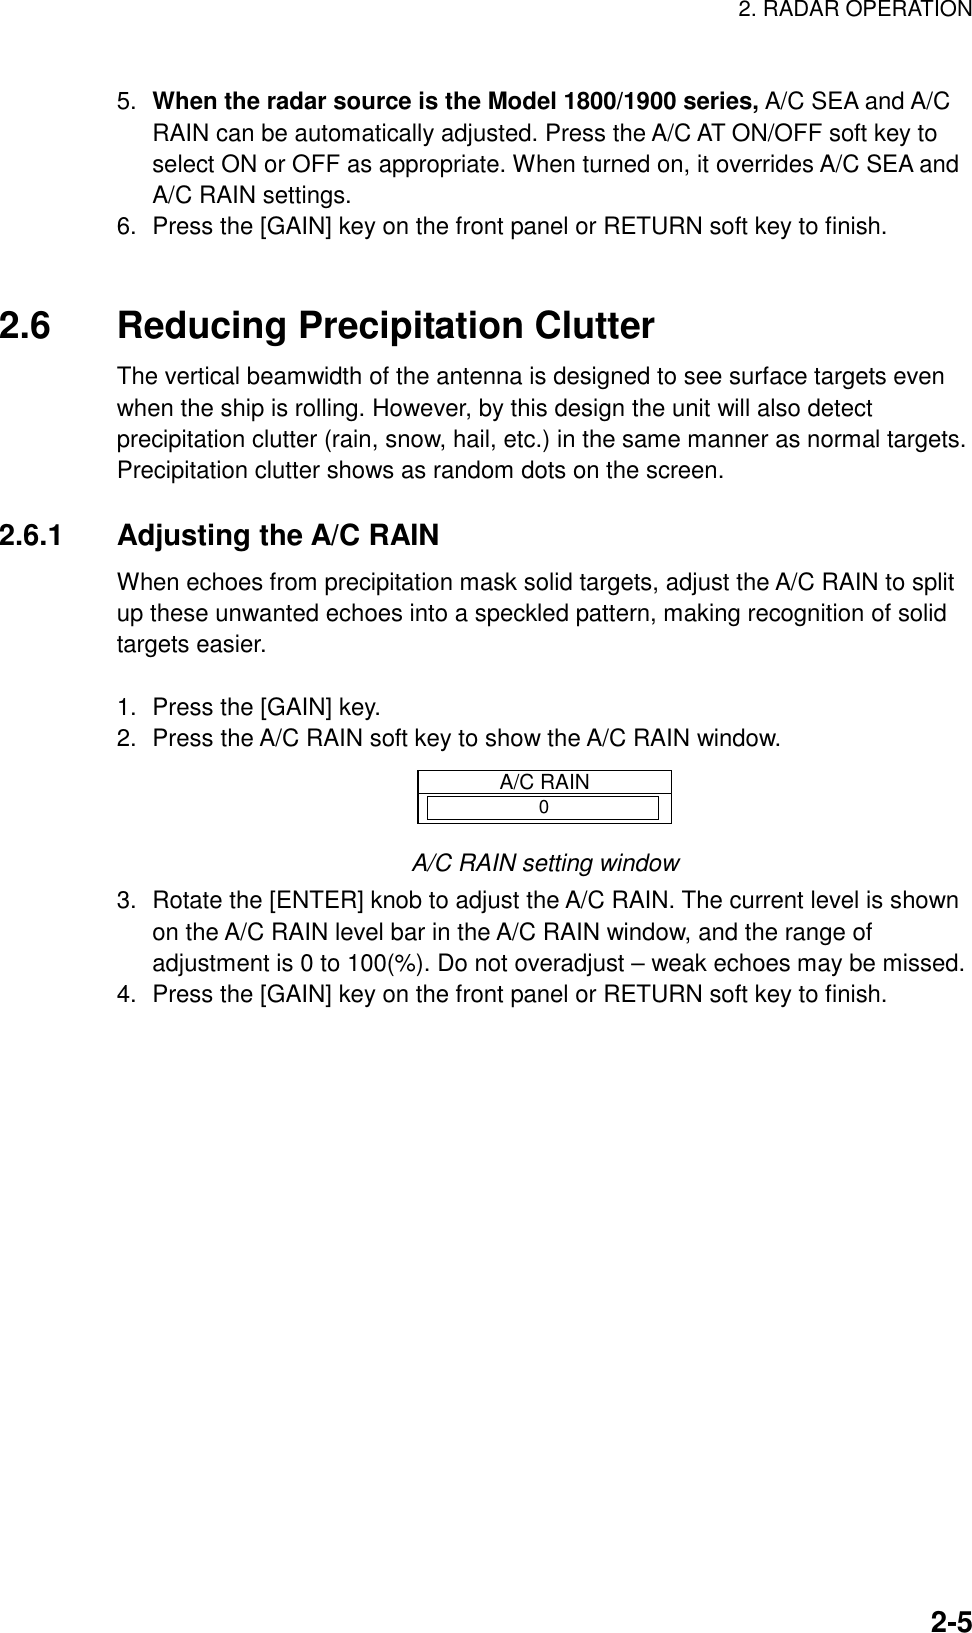 2. RADAR OPERATION    2-55.  When the radar source is the Model 1800/1900 series, A/C SEA and A/C RAIN can be automatically adjusted. Press the A/C AT ON/OFF soft key to select ON or OFF as appropriate. When turned on, it overrides A/C SEA and A/C RAIN settings. 6.  Press the [GAIN] key on the front panel or RETURN soft key to finish.     2.6  Reducing Precipitation Clutter The vertical beamwidth of the antenna is designed to see surface targets even when the ship is rolling. However, by this design the unit will also detect precipitation clutter (rain, snow, hail, etc.) in the same manner as normal targets. Precipitation clutter shows as random dots on the screen.  2.6.1 Adjusting the A/C RAIN When echoes from precipitation mask solid targets, adjust the A/C RAIN to split up these unwanted echoes into a speckled pattern, making recognition of solid targets easier.  1.  Press the [GAIN] key. 2.  Press the A/C RAIN soft key to show the A/C RAIN window. A/C RAIN0 A/C RAIN setting window 3.  Rotate the [ENTER] knob to adjust the A/C RAIN. The current level is shown on the A/C RAIN level bar in the A/C RAIN window, and the range of adjustment is 0 to 100(%). Do not overadjust – weak echoes may be missed. 4.  Press the [GAIN] key on the front panel or RETURN soft key to finish. 